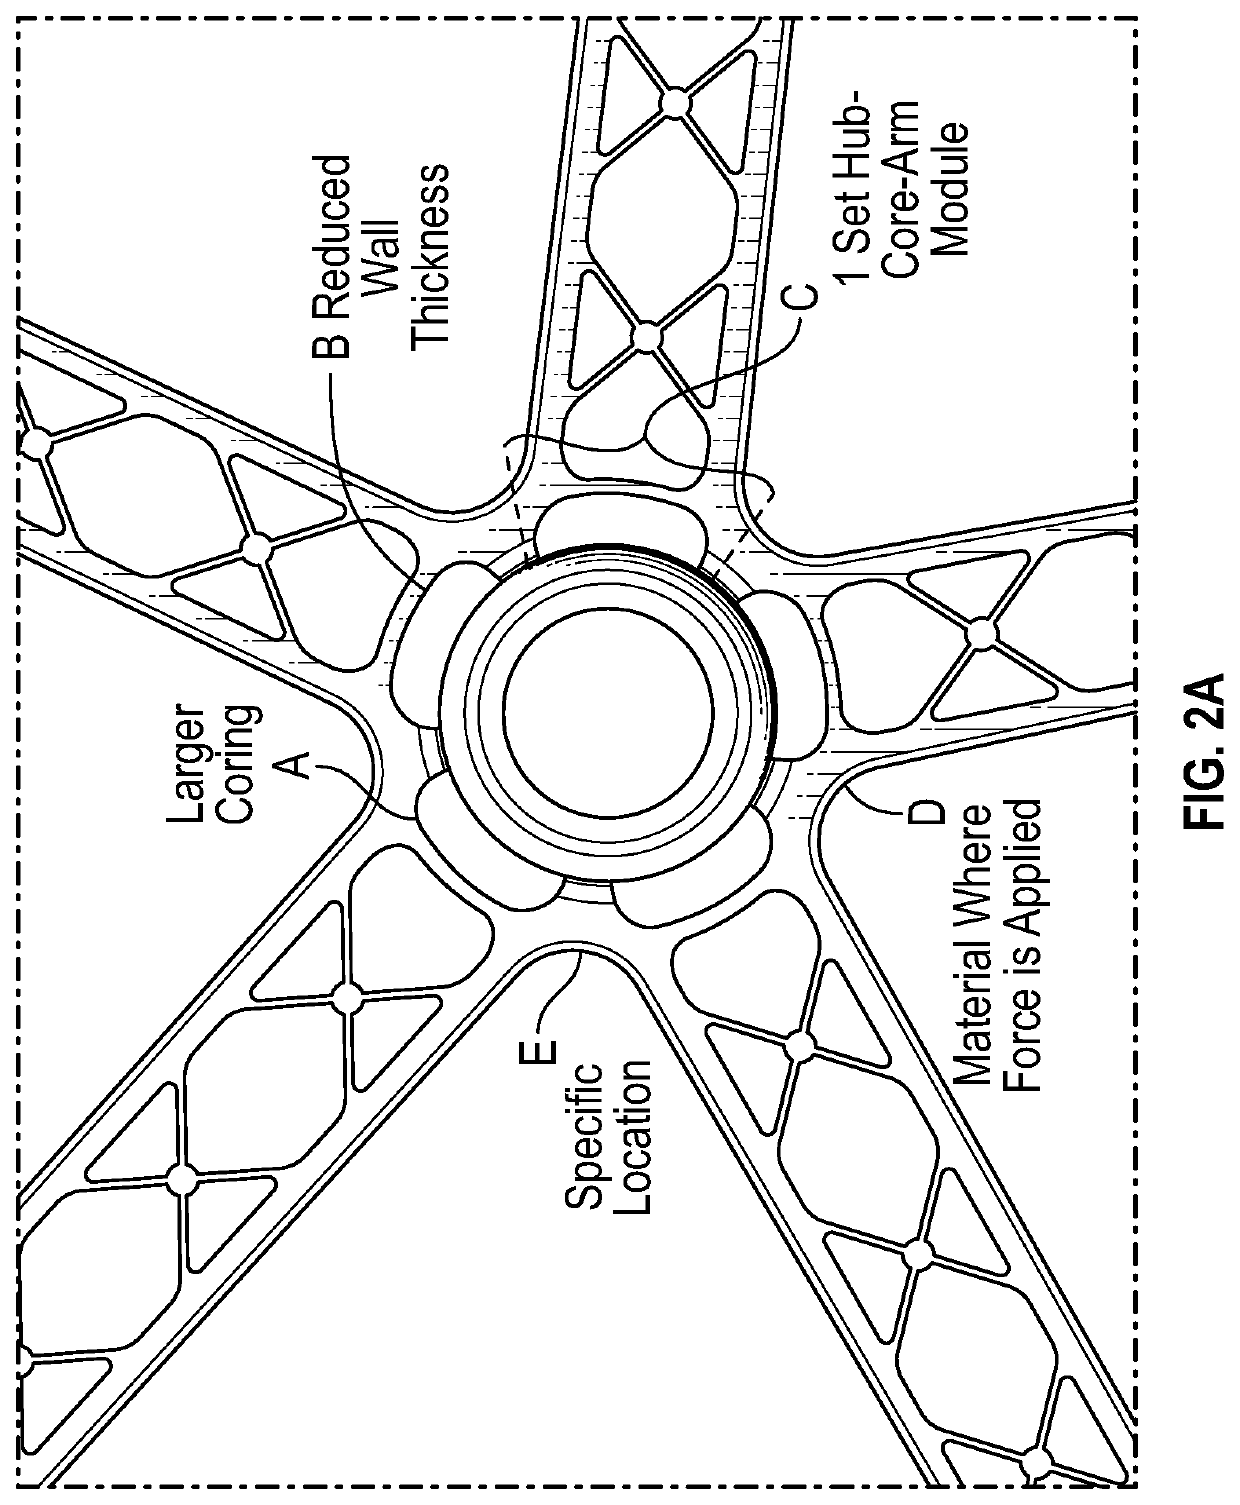 Apparatus and methods for the understructure of a chair base